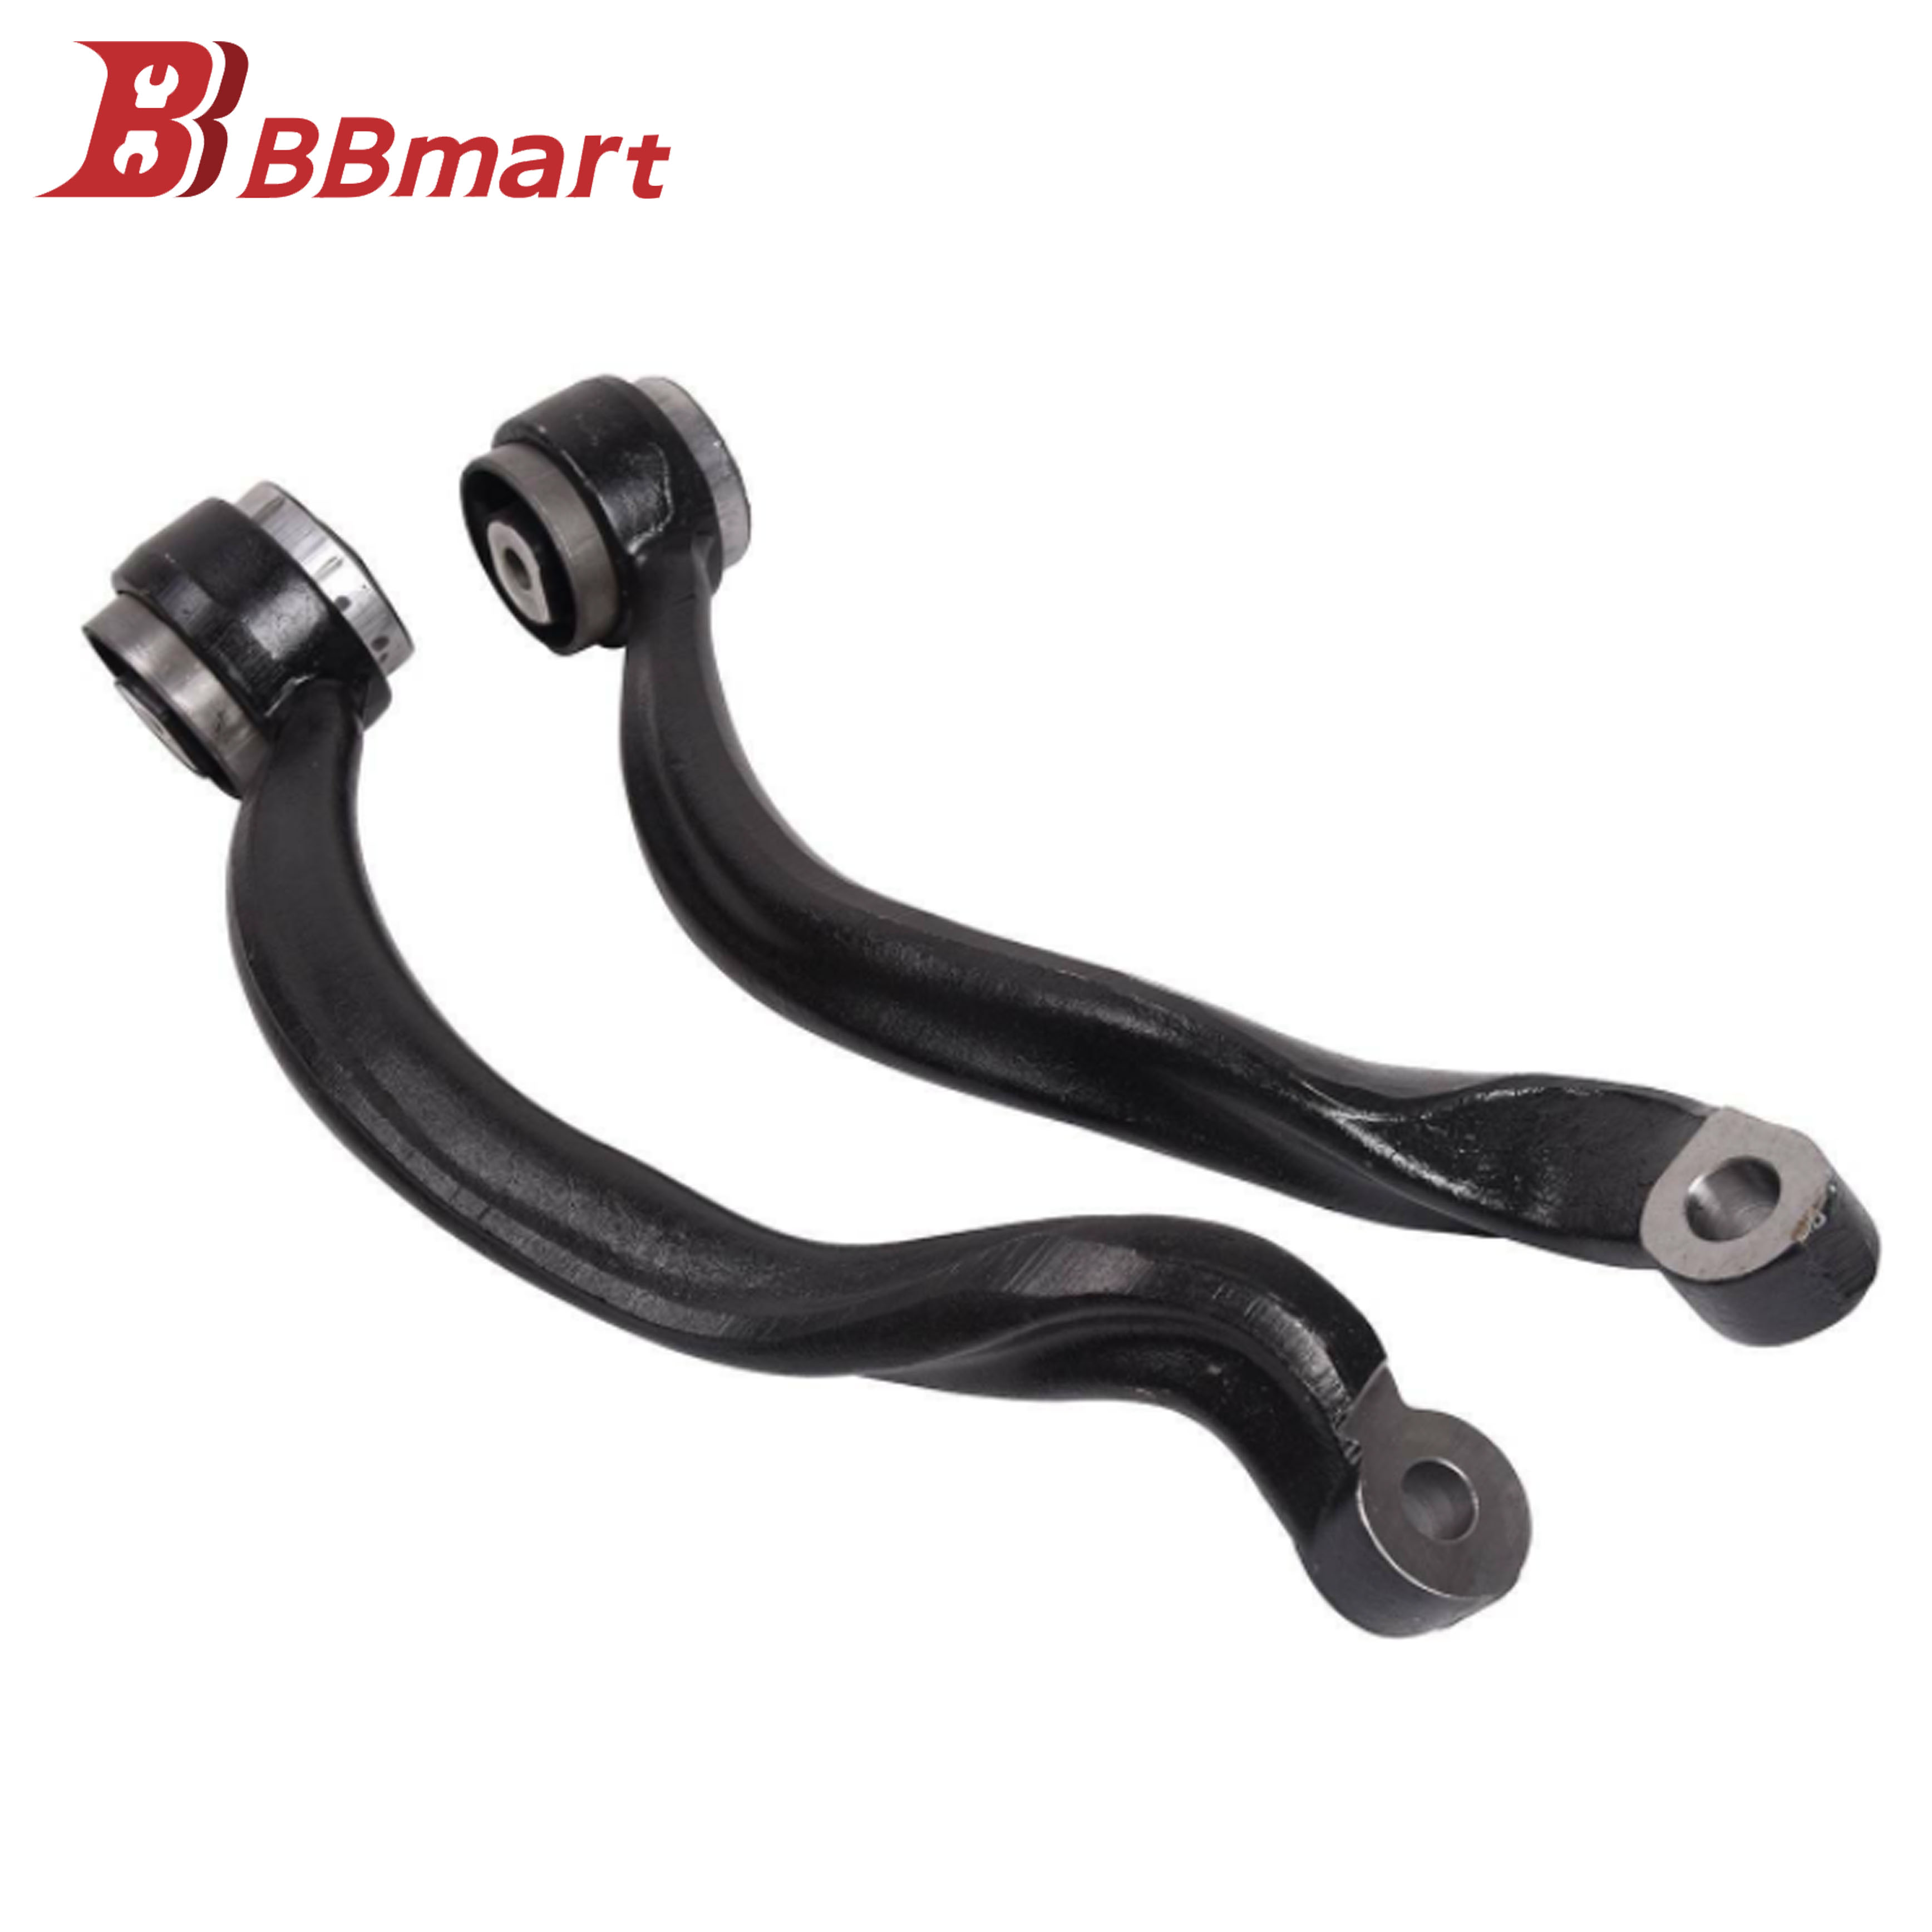 BBmart OEM Auto Parts Front Upper Right Control Arm For Land Rover RANGE ROVER OE LR018343